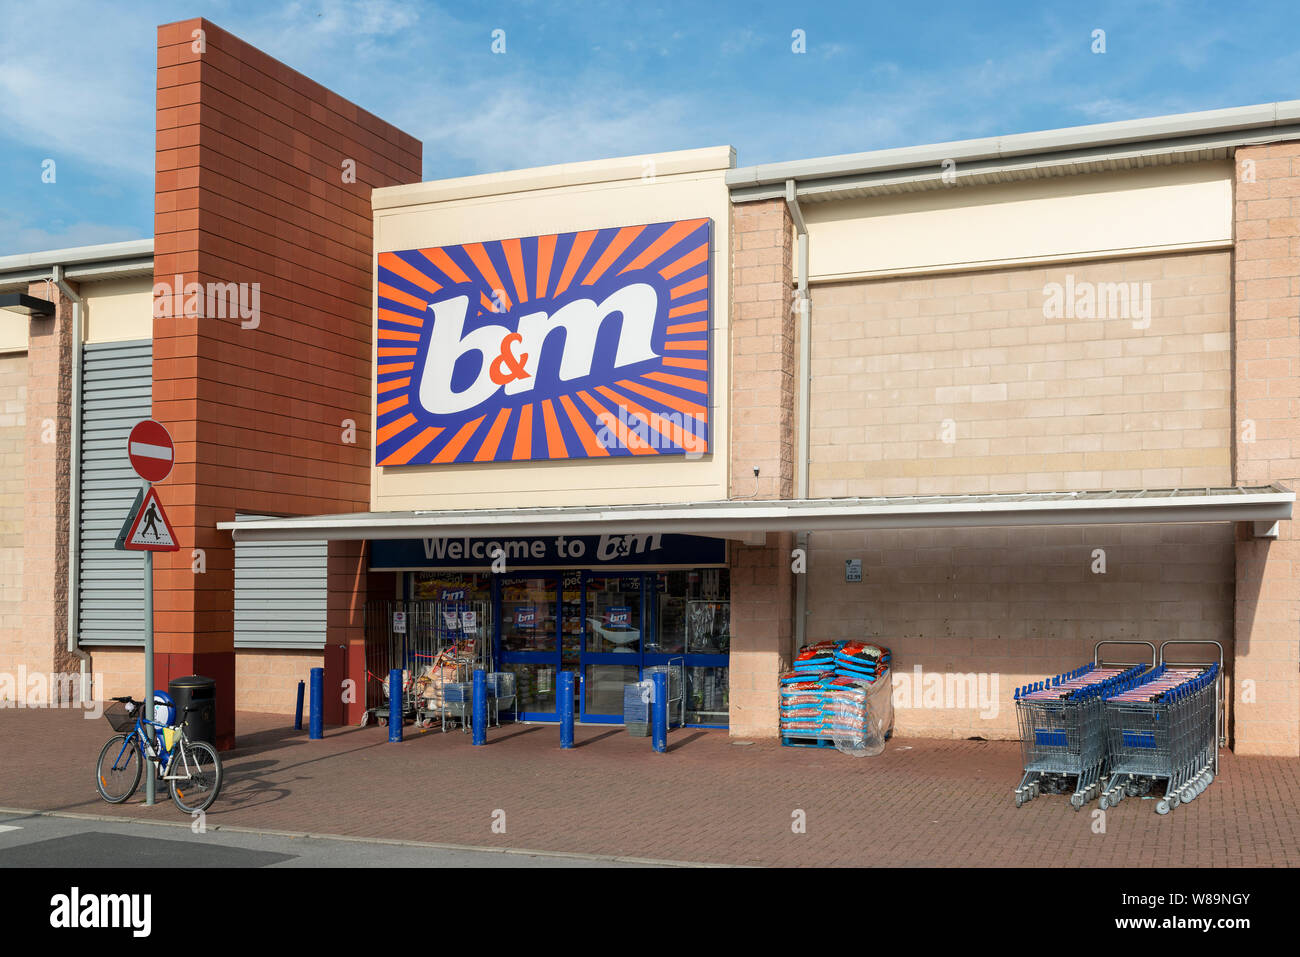 The storefront of the retailer B&M on a retail park in Baguley, Manchester. (Editorial use only). Stock Photo